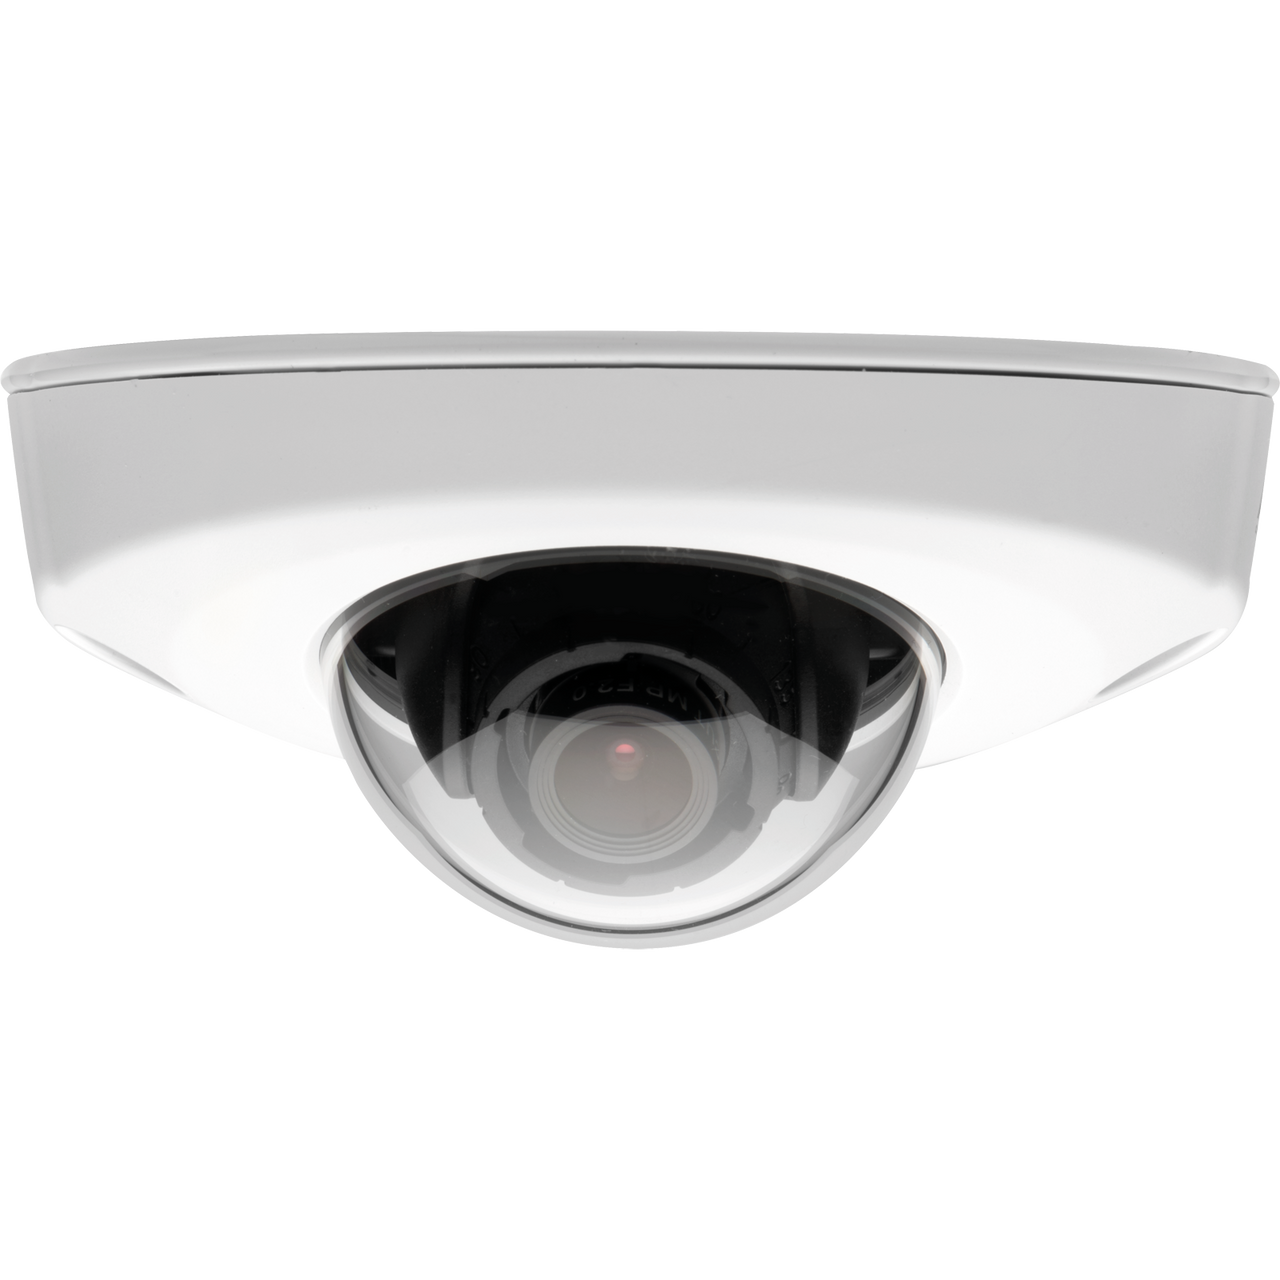 AXIS P3905-R Mk II M12 Onboard HDTV 1080p surveillance with Zipstream